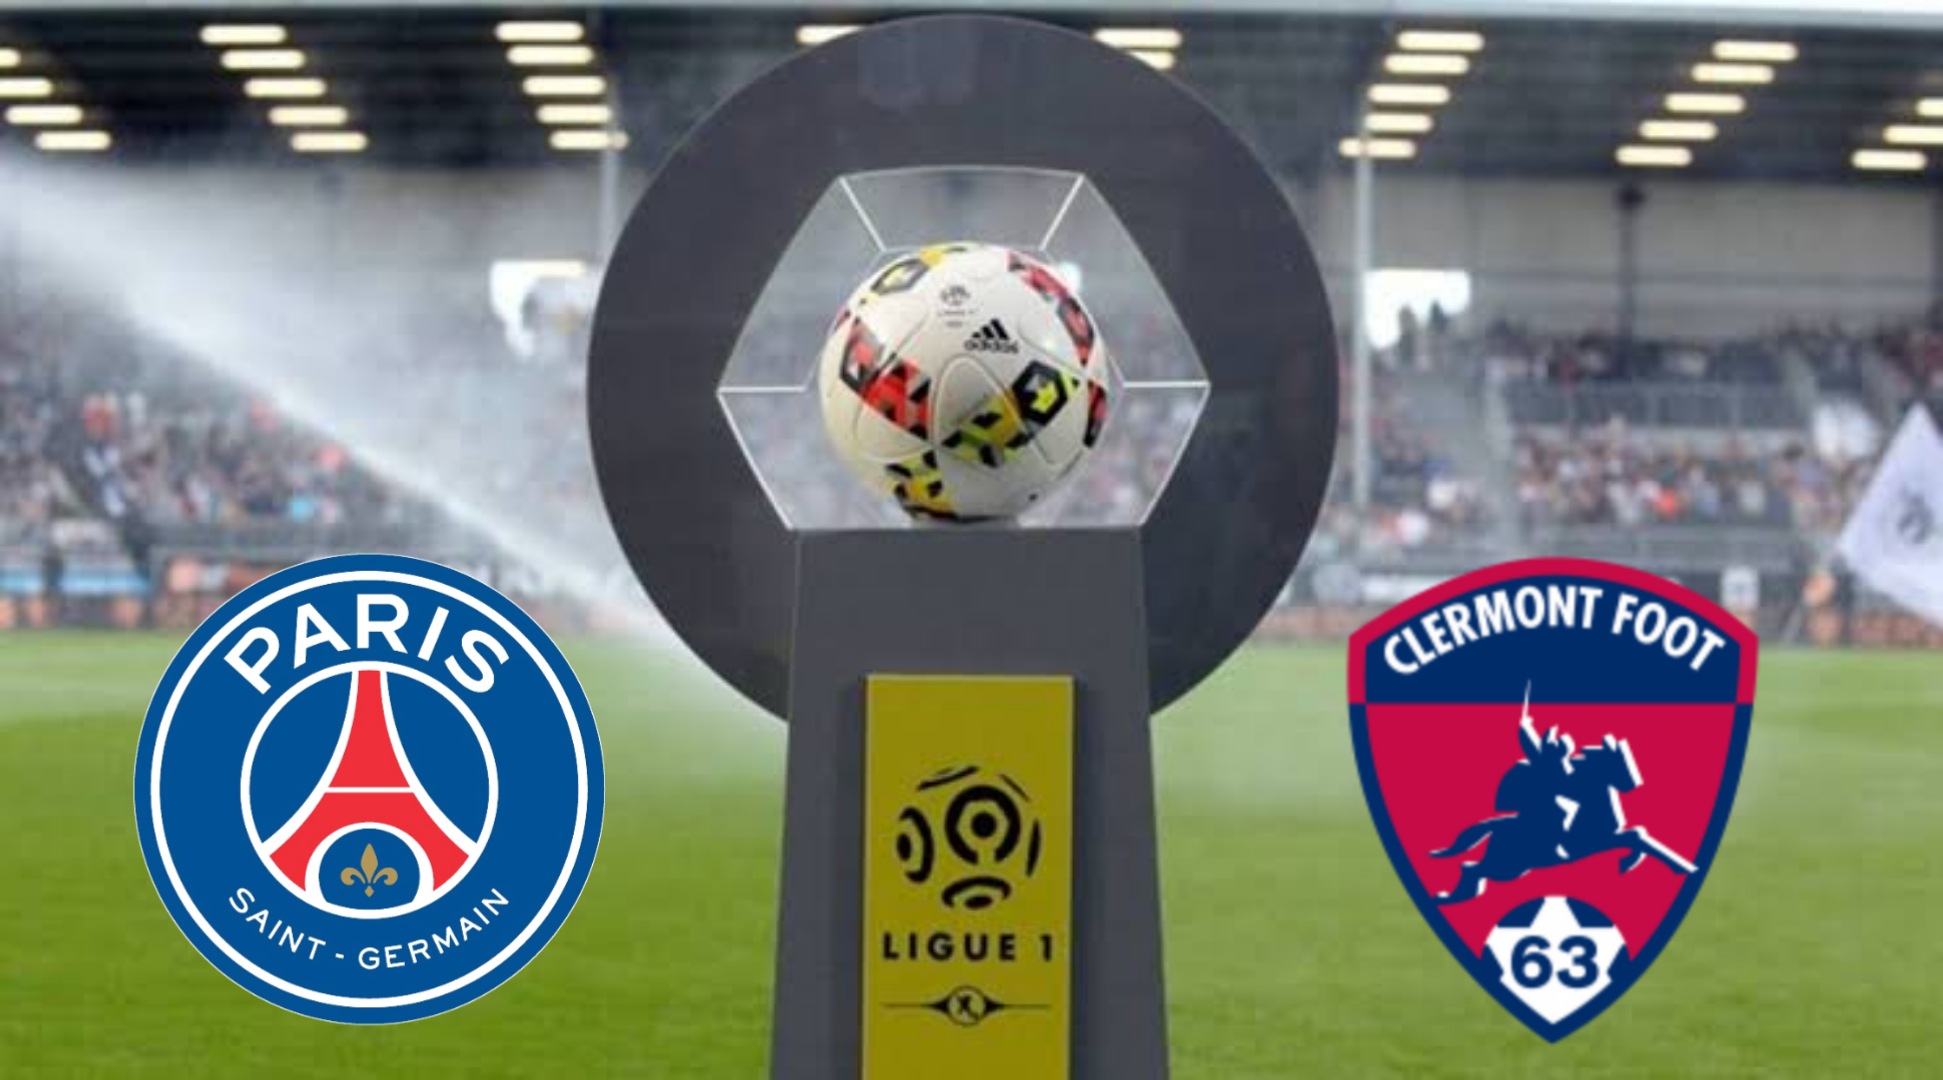 Ligue 1 – Clermont vs PSG: Predictions, odds, lineups, team form and more